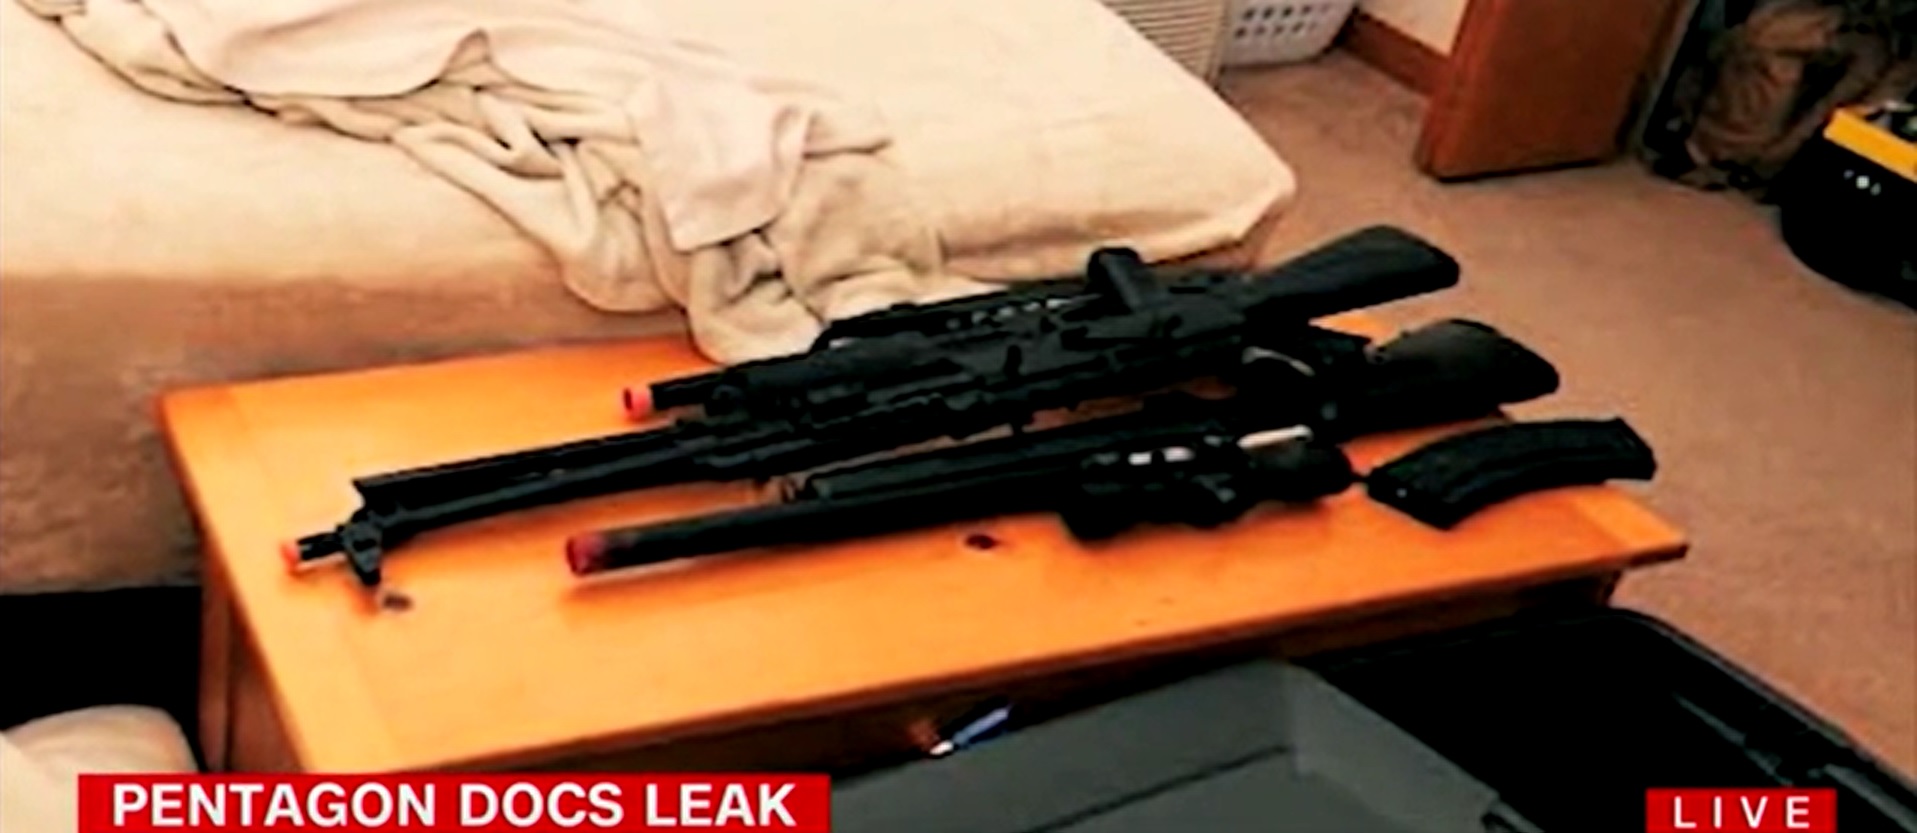 Multiple Weapons': CNN Appears To Mistake Imitation Firearms For